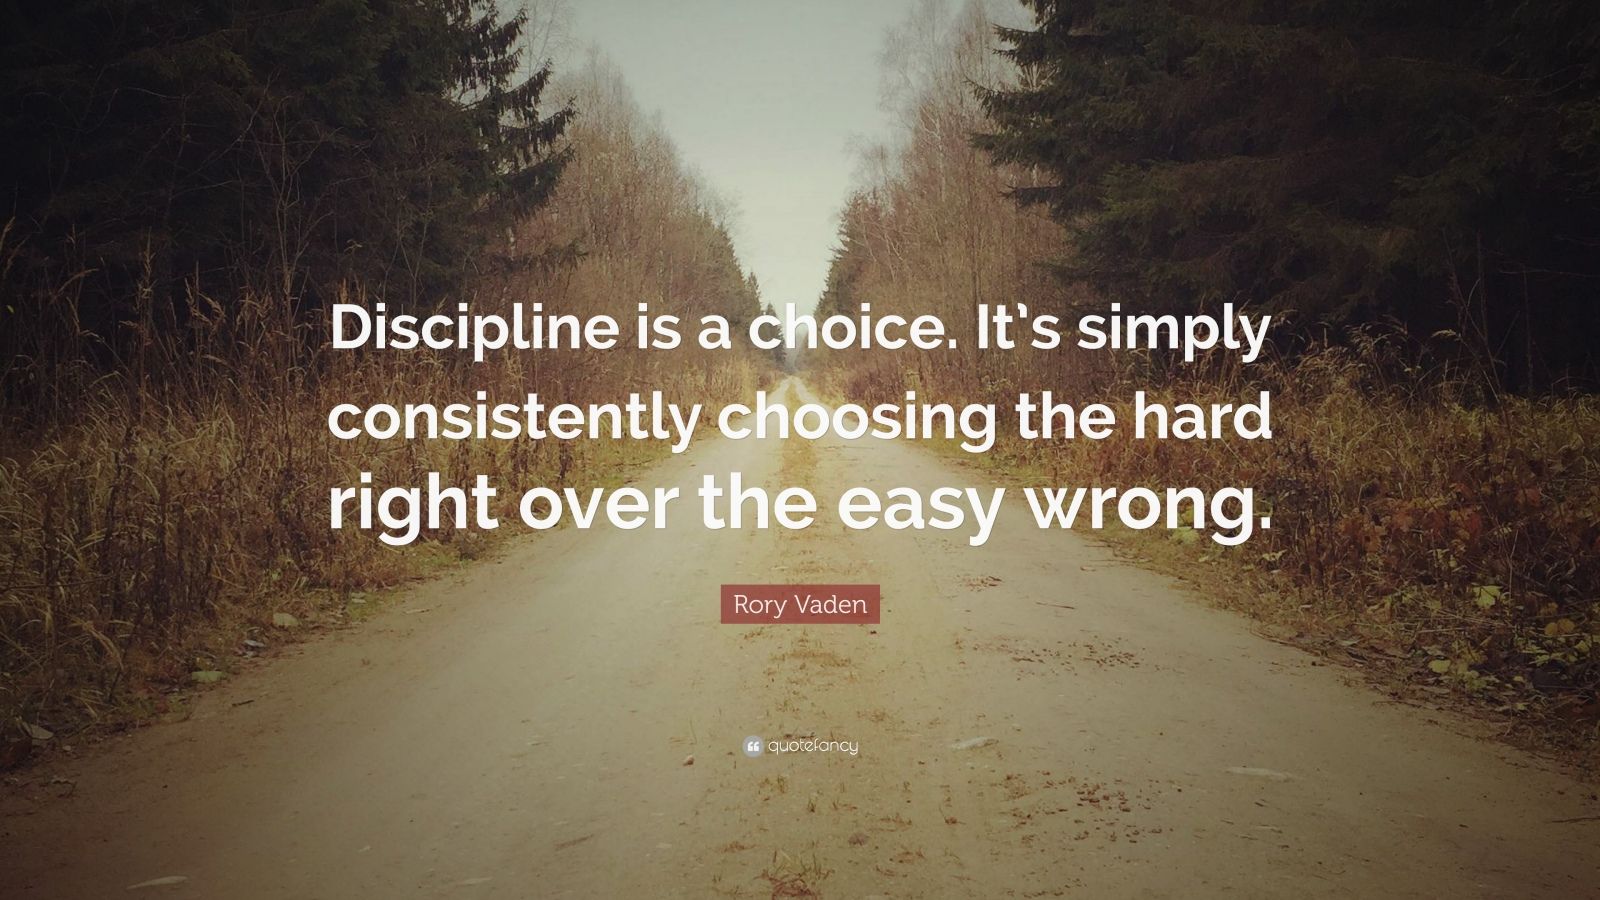 Rory Vaden Quote: “Discipline is a choice. It’s simply consistently